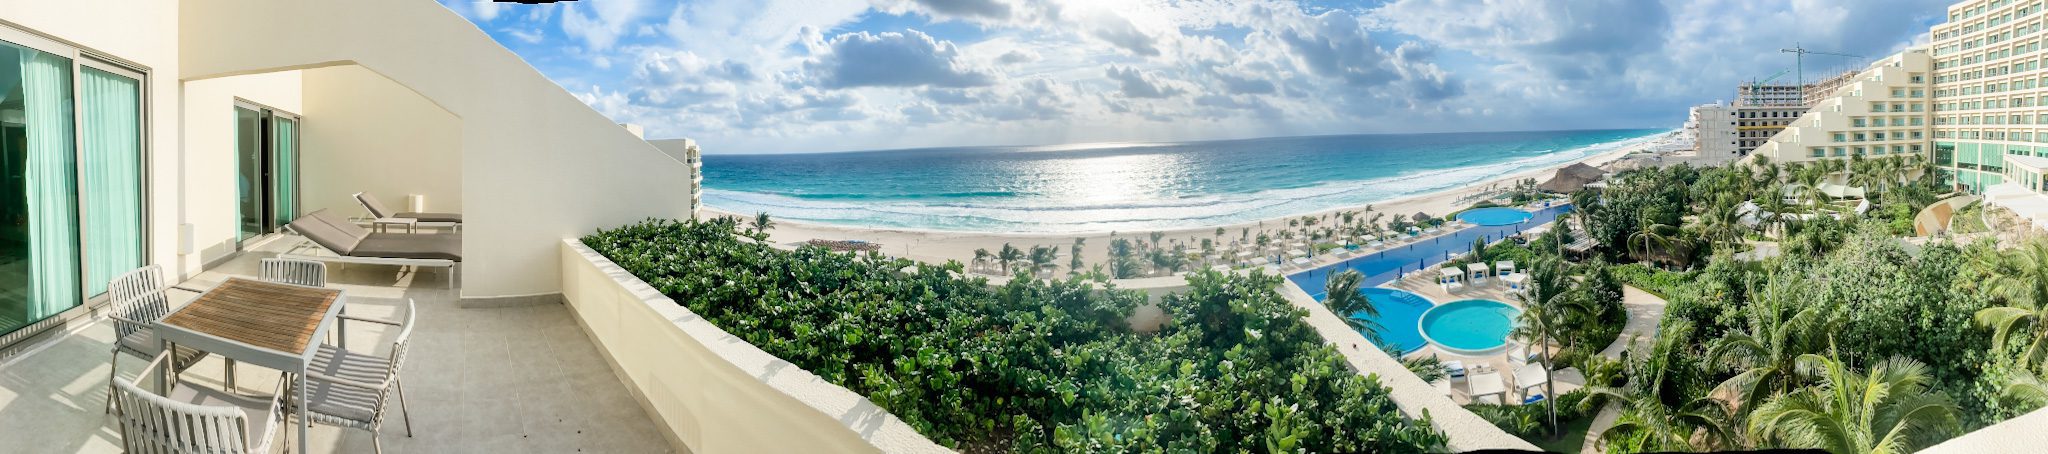 Cancun - pano from room